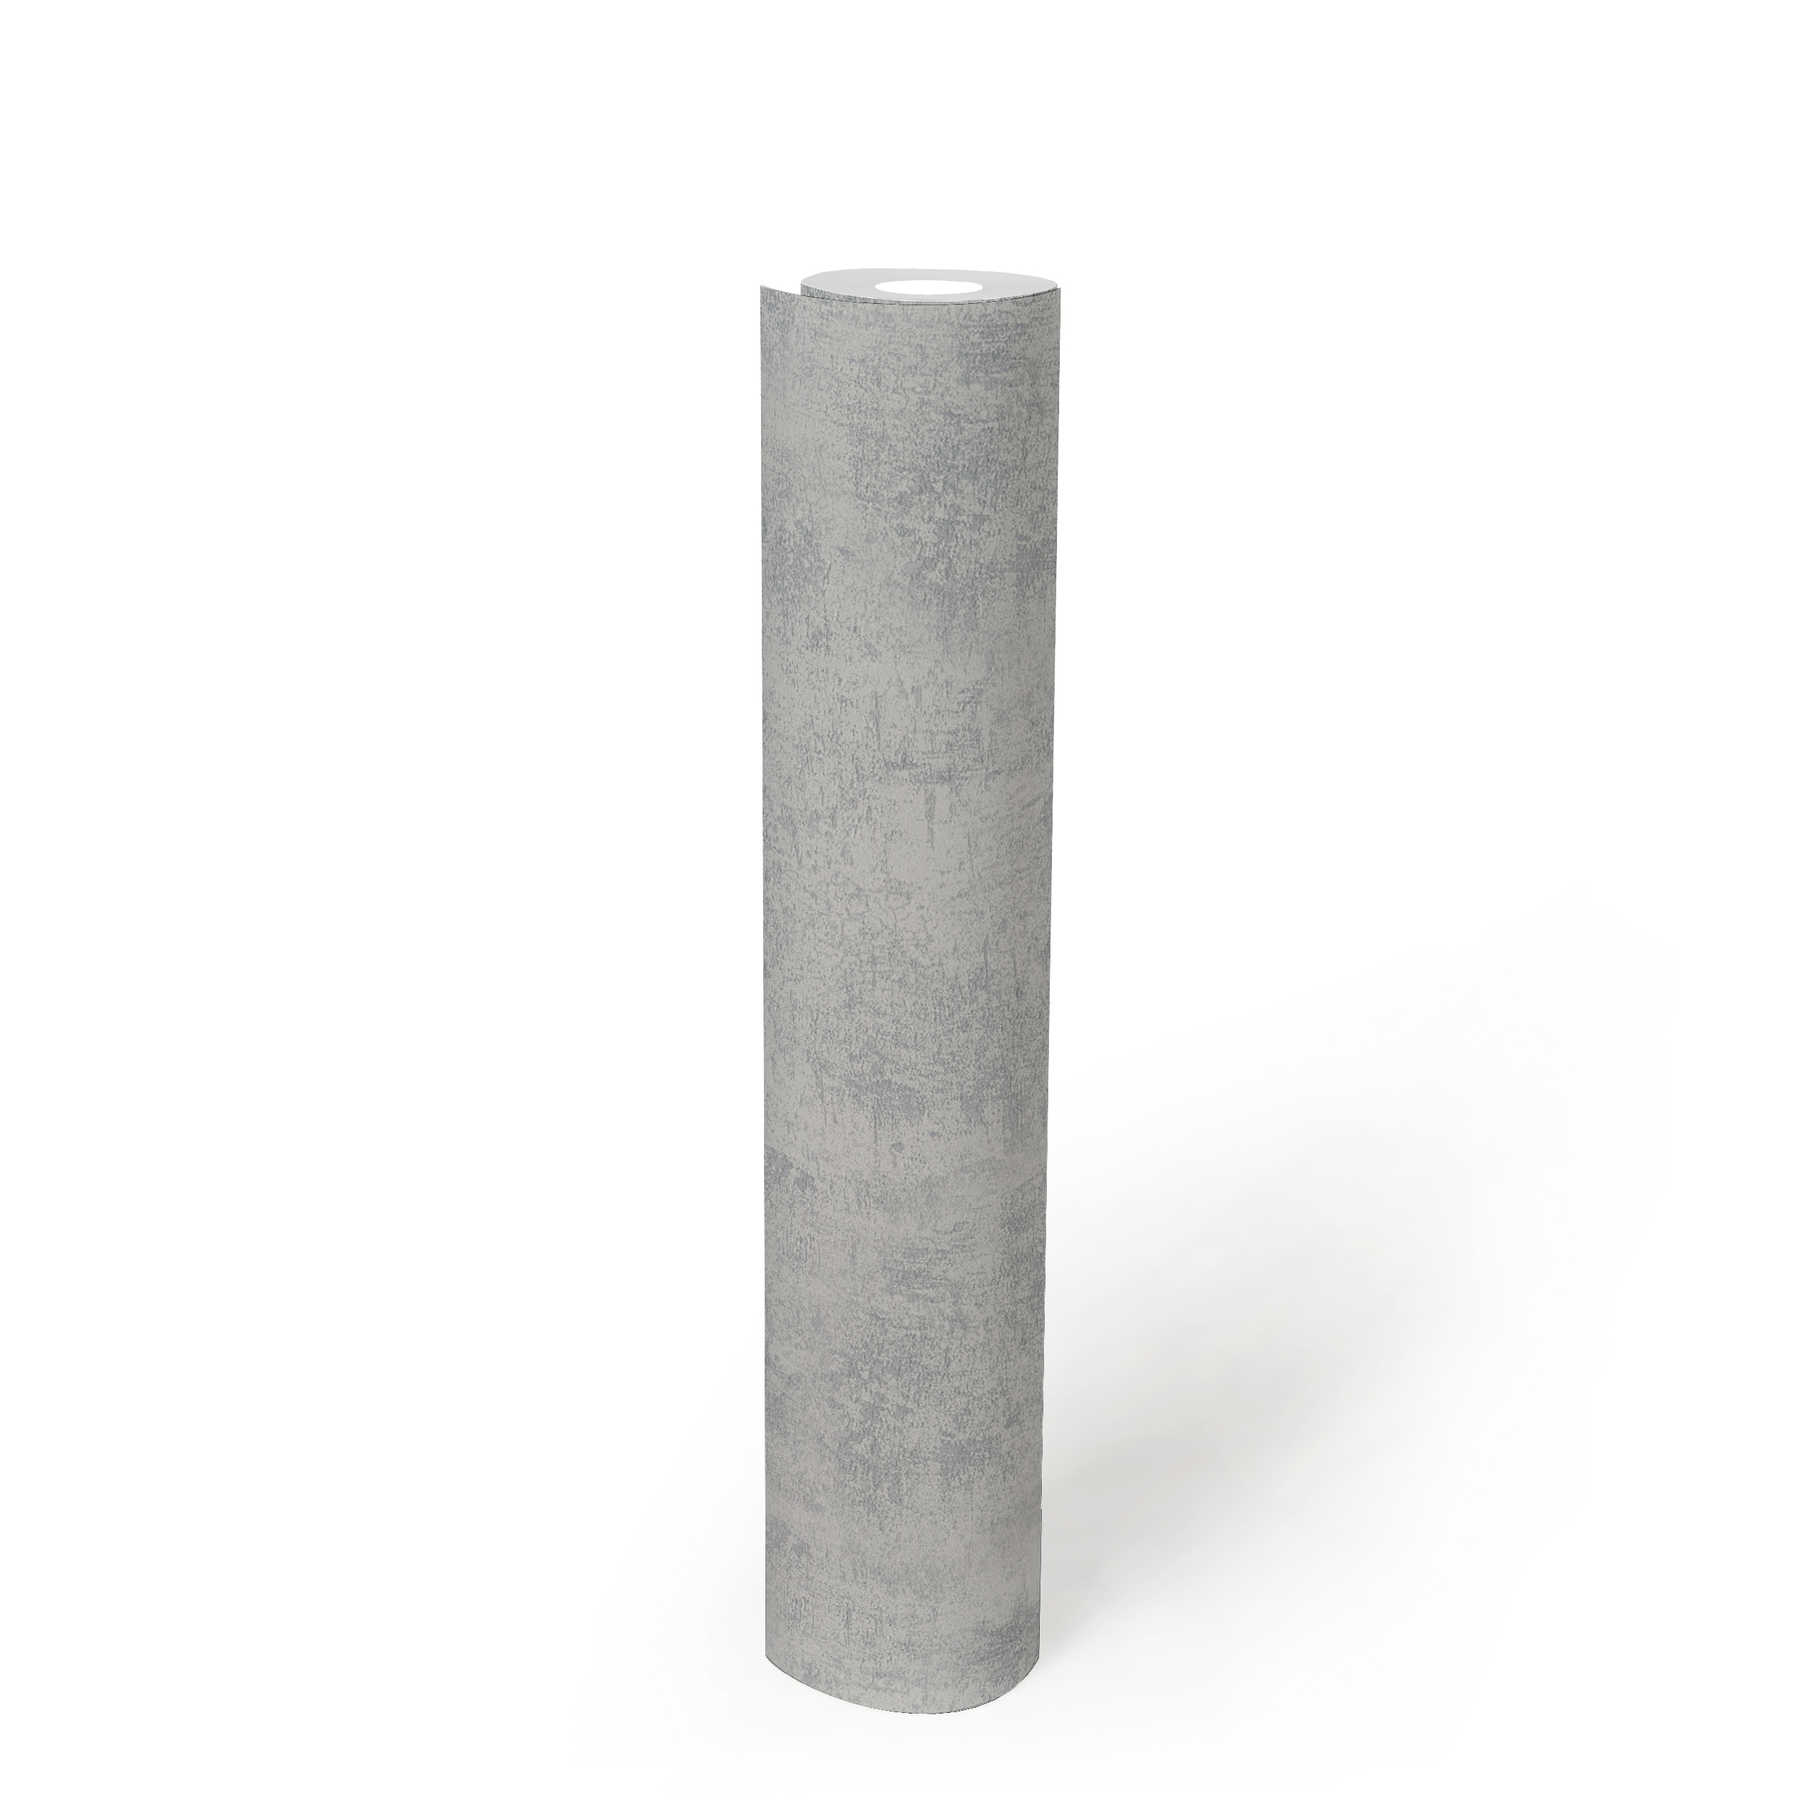             Wallpaper with concrete look in industrial style - grey
        